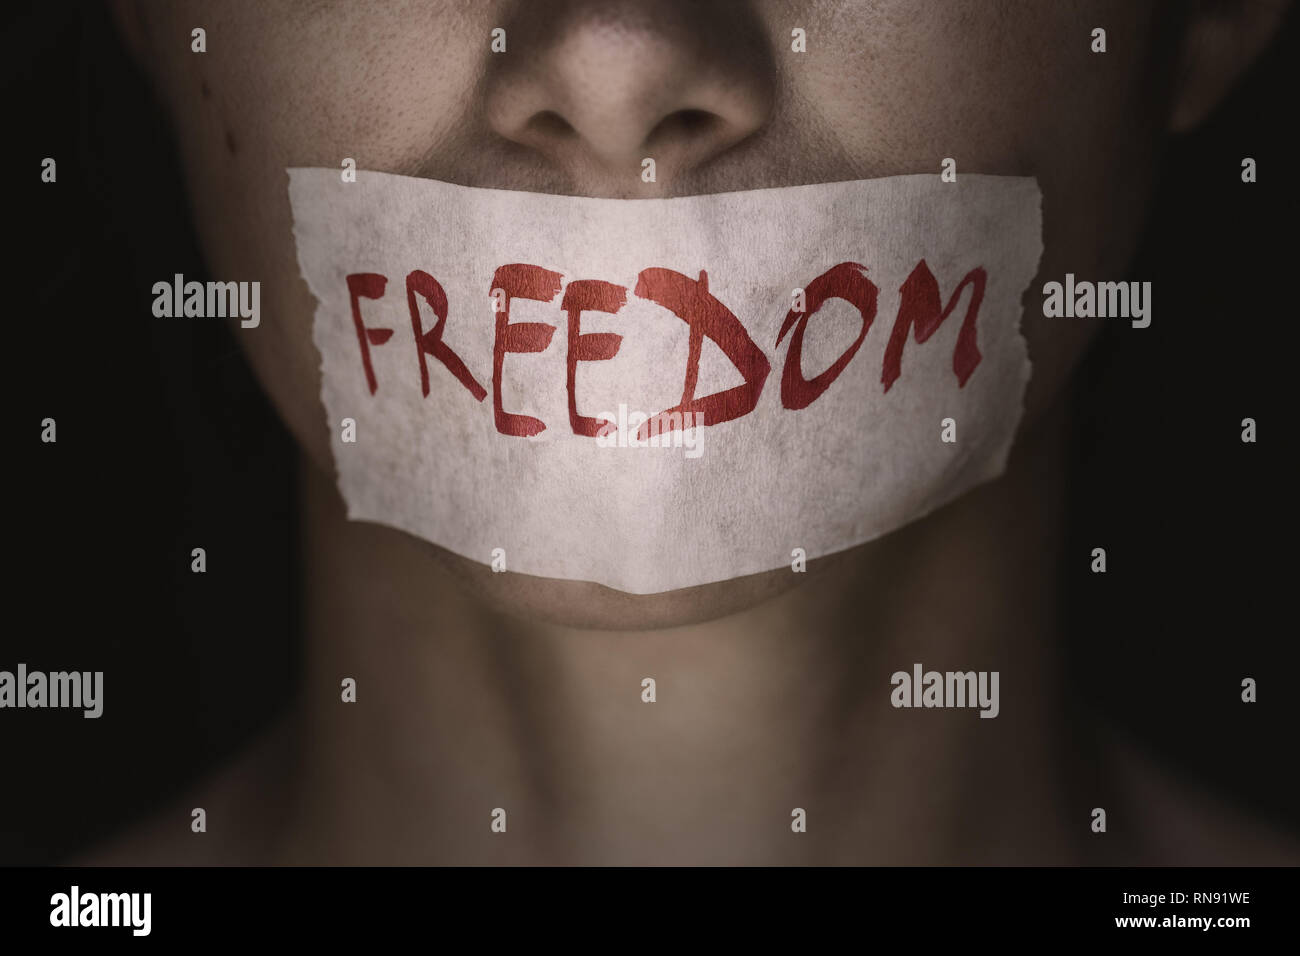 Freedom of speech: girls face is sealed with tape, close-up Stock Photo